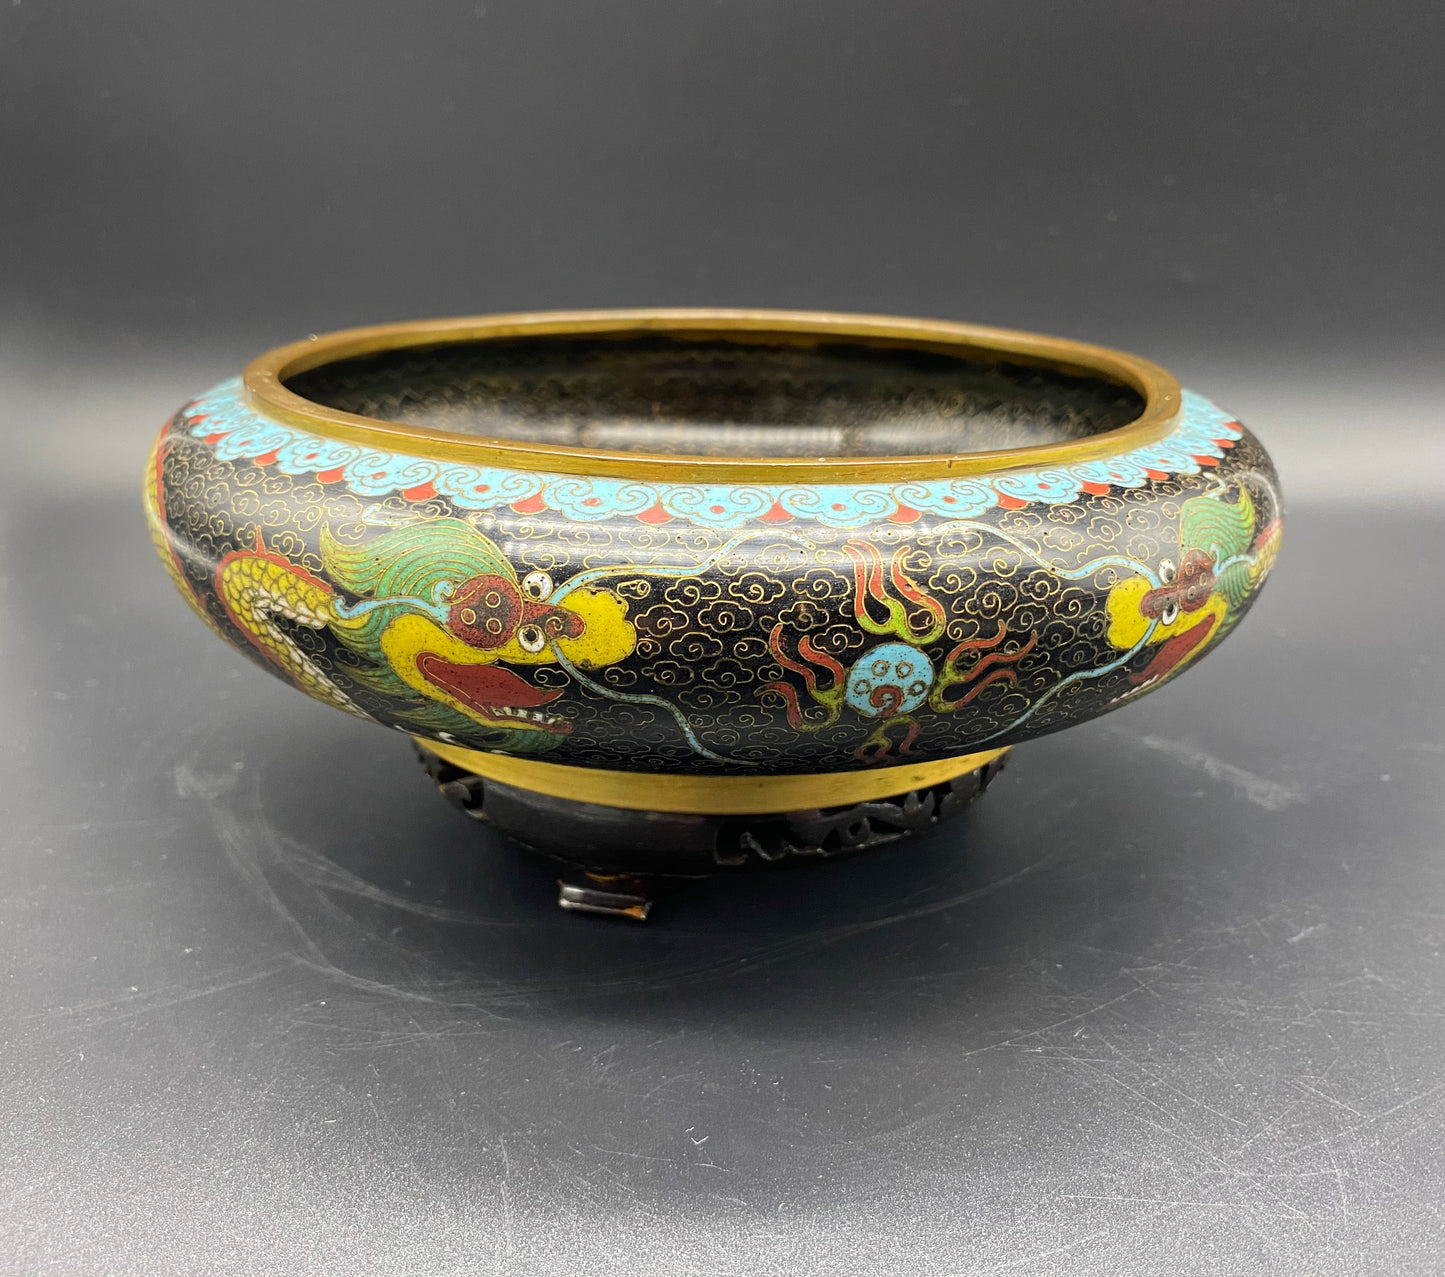 Chinese cloisonné and Japanese cloisonné, look closely at the surface. Generally, Japanese cloisonné looks glassy because of the grinding and buffing process used to produce it